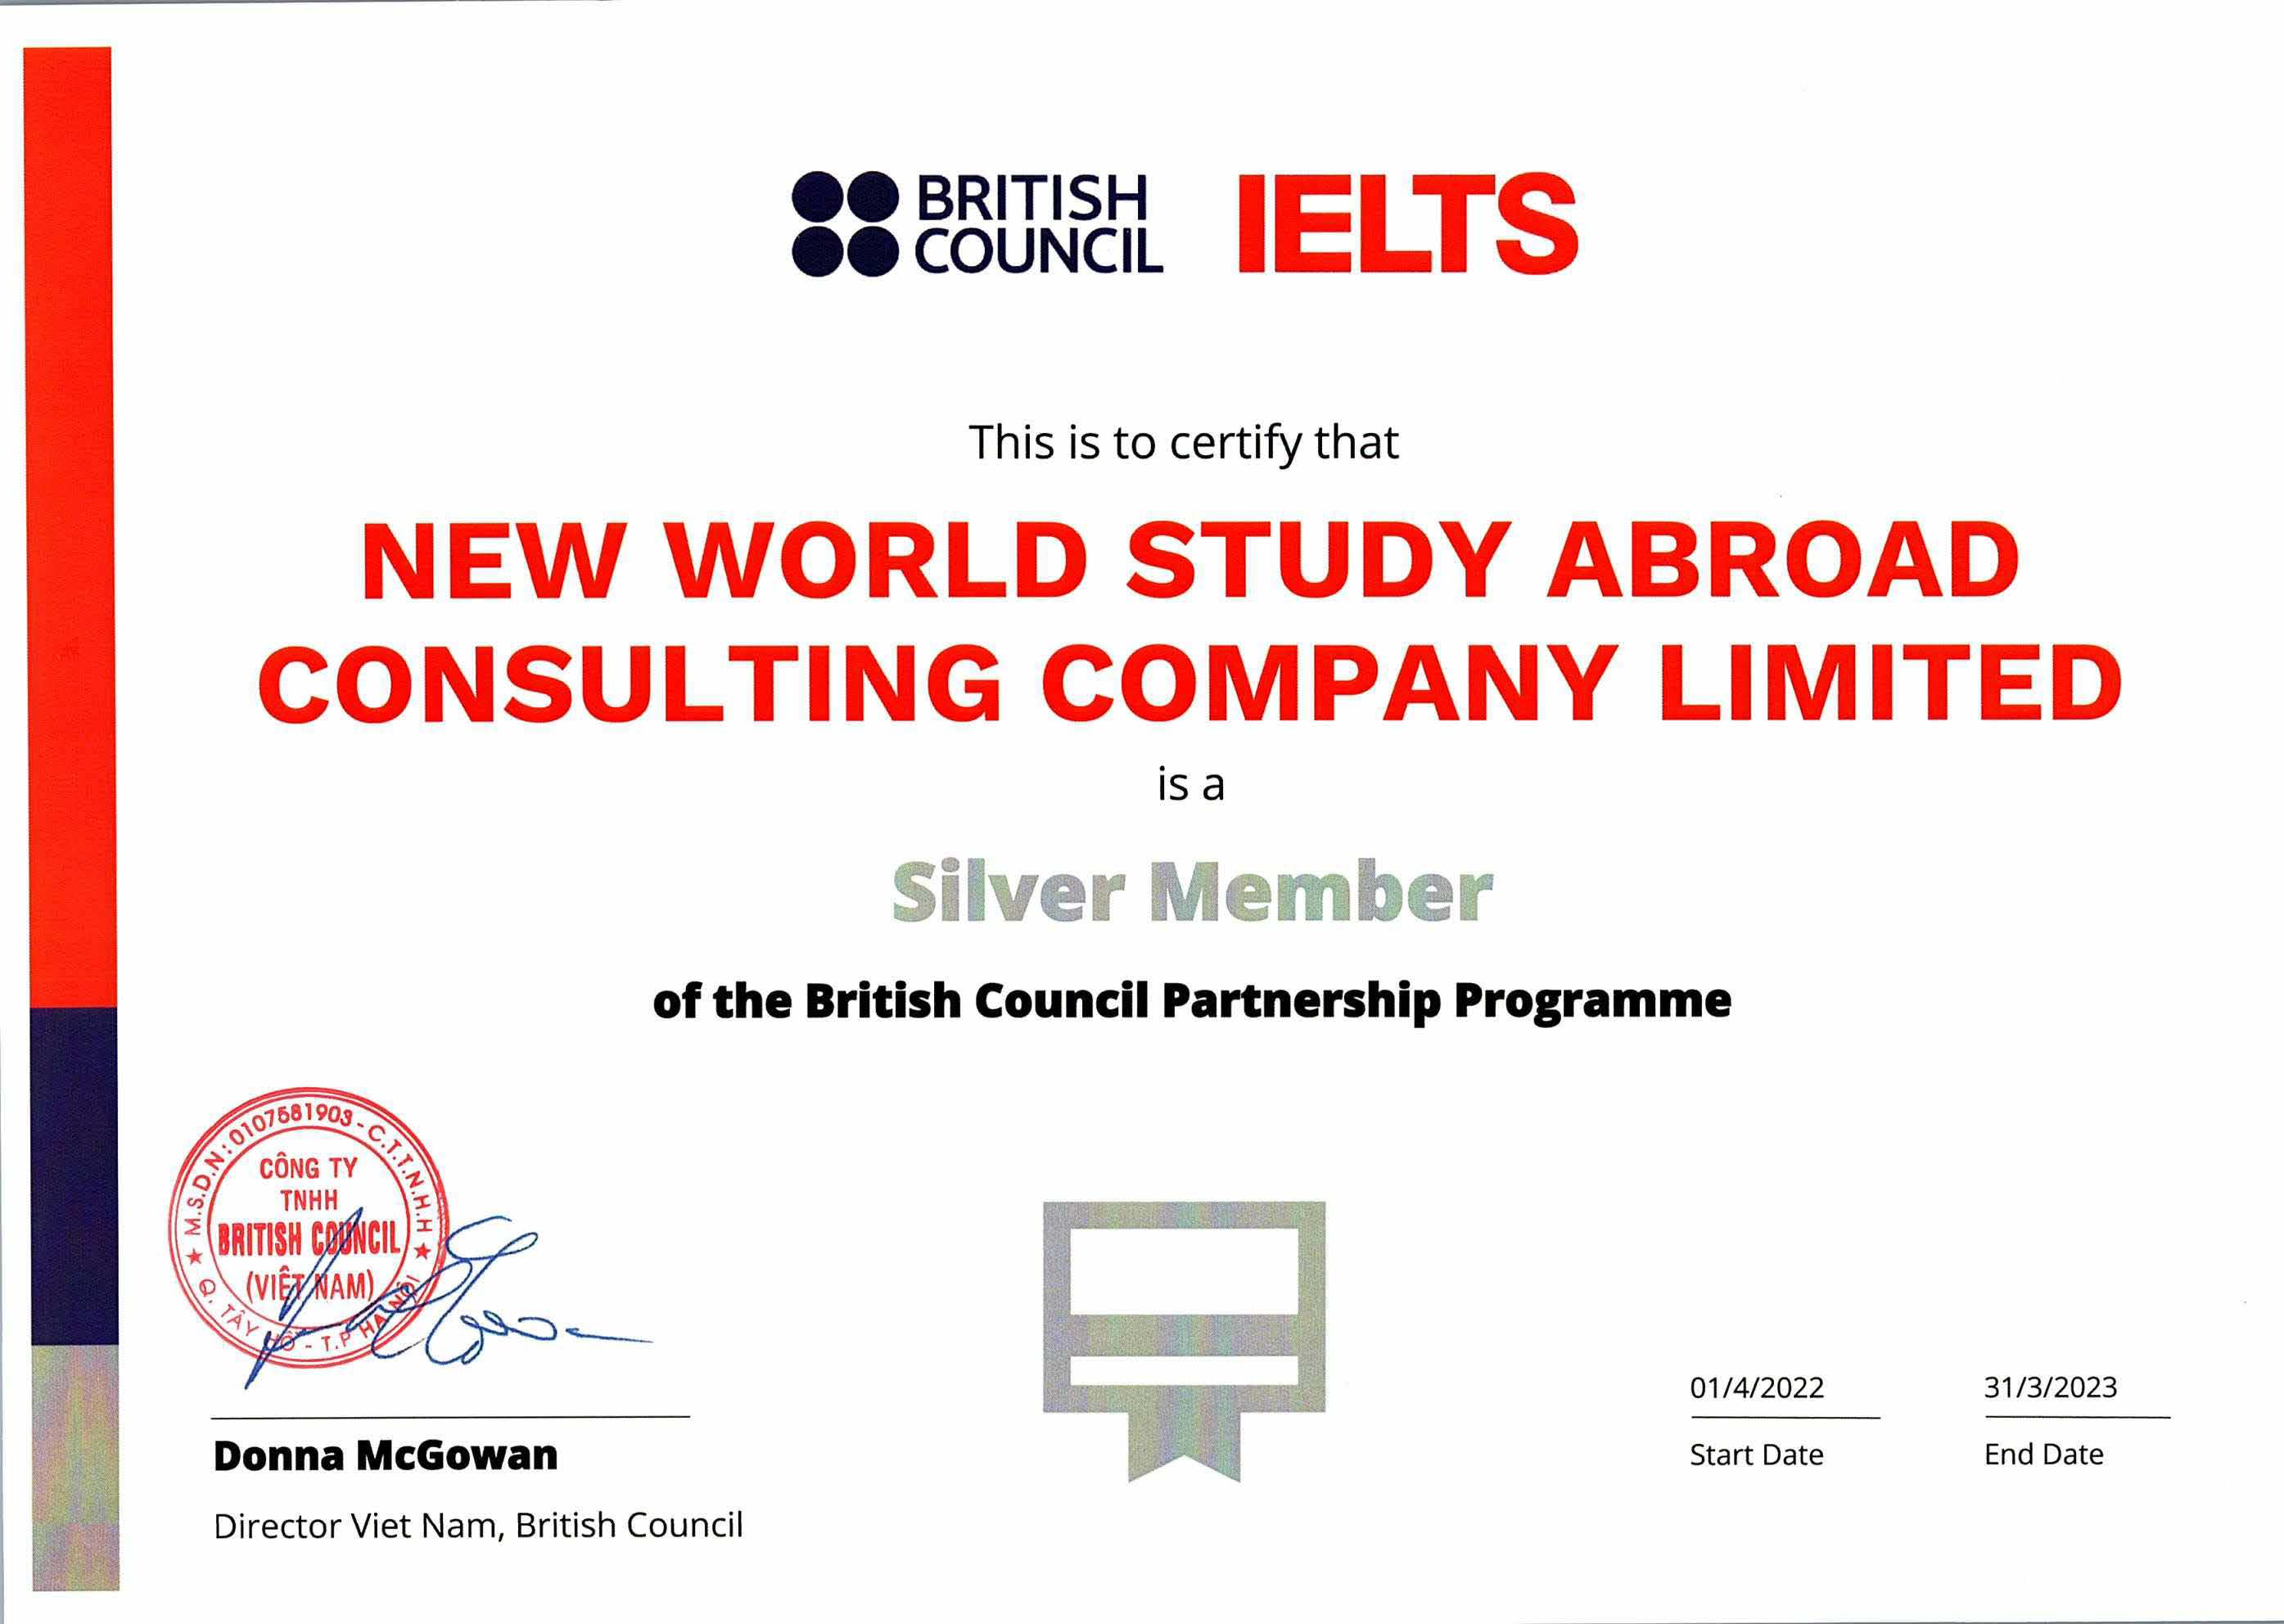 Silver Member of British Council IELTS